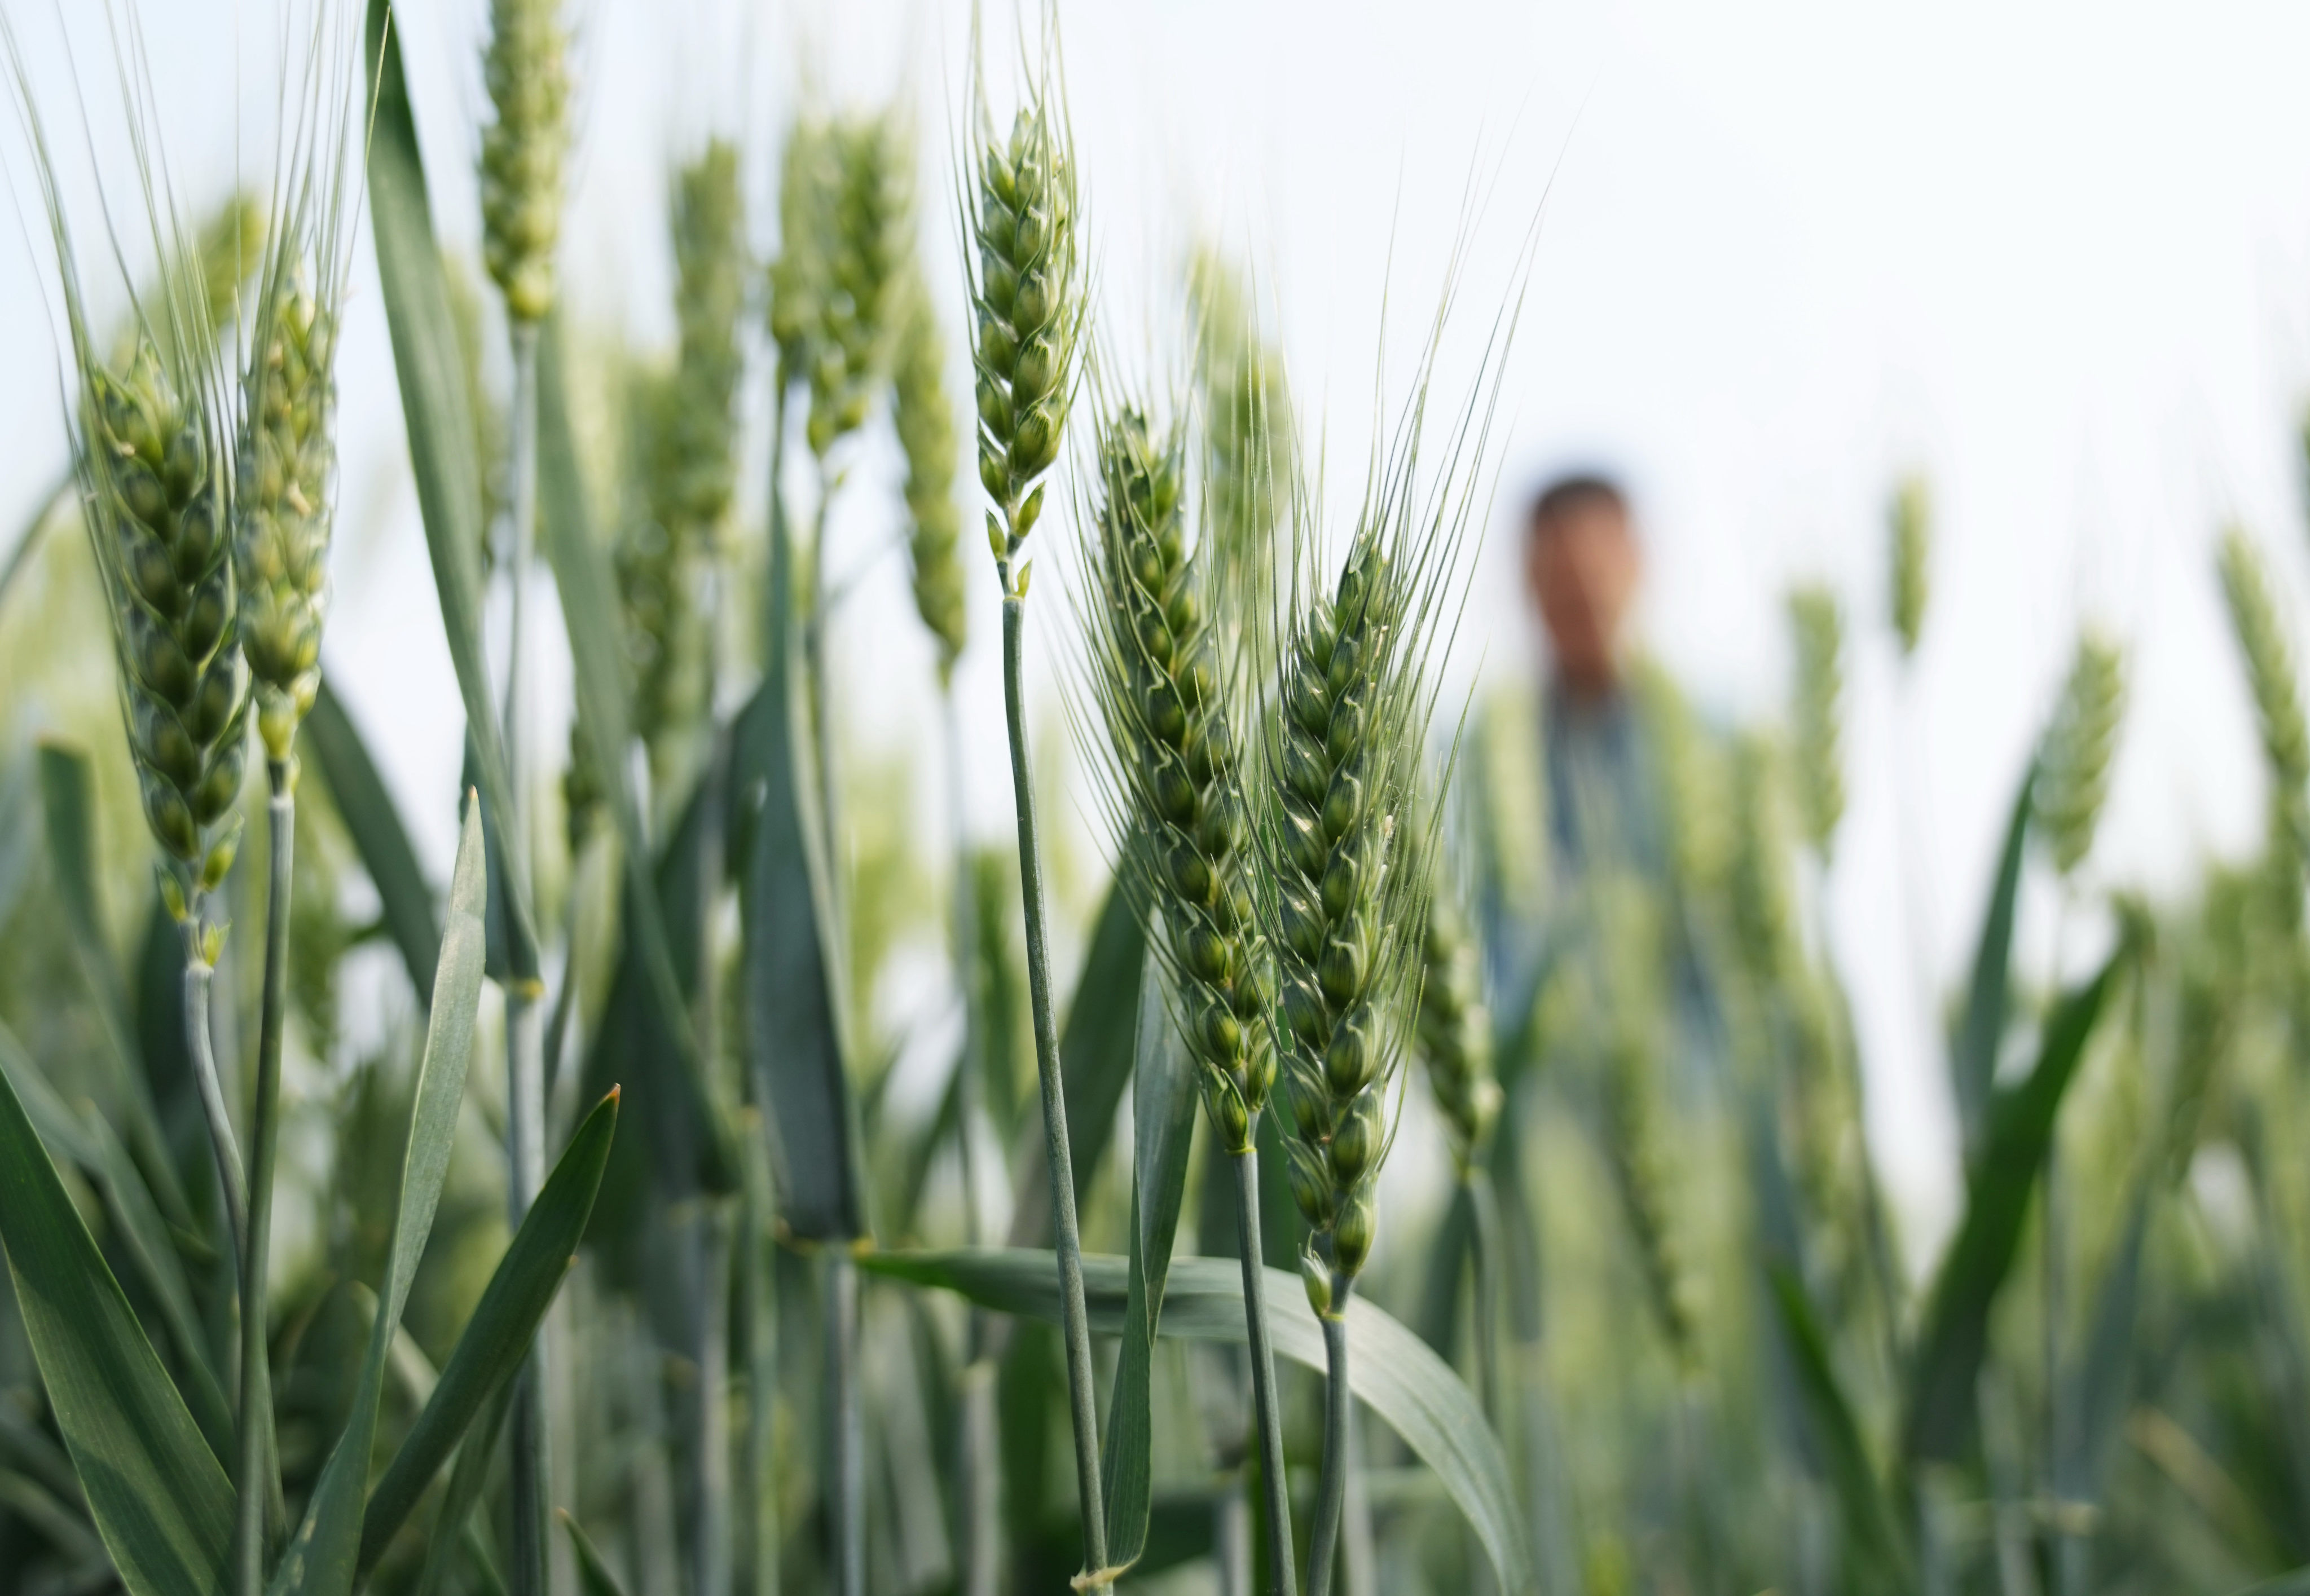 Wheat crops seen in a field in Shenze county, northern Hebei province, on May 10, 2022. Photo: Xinhua